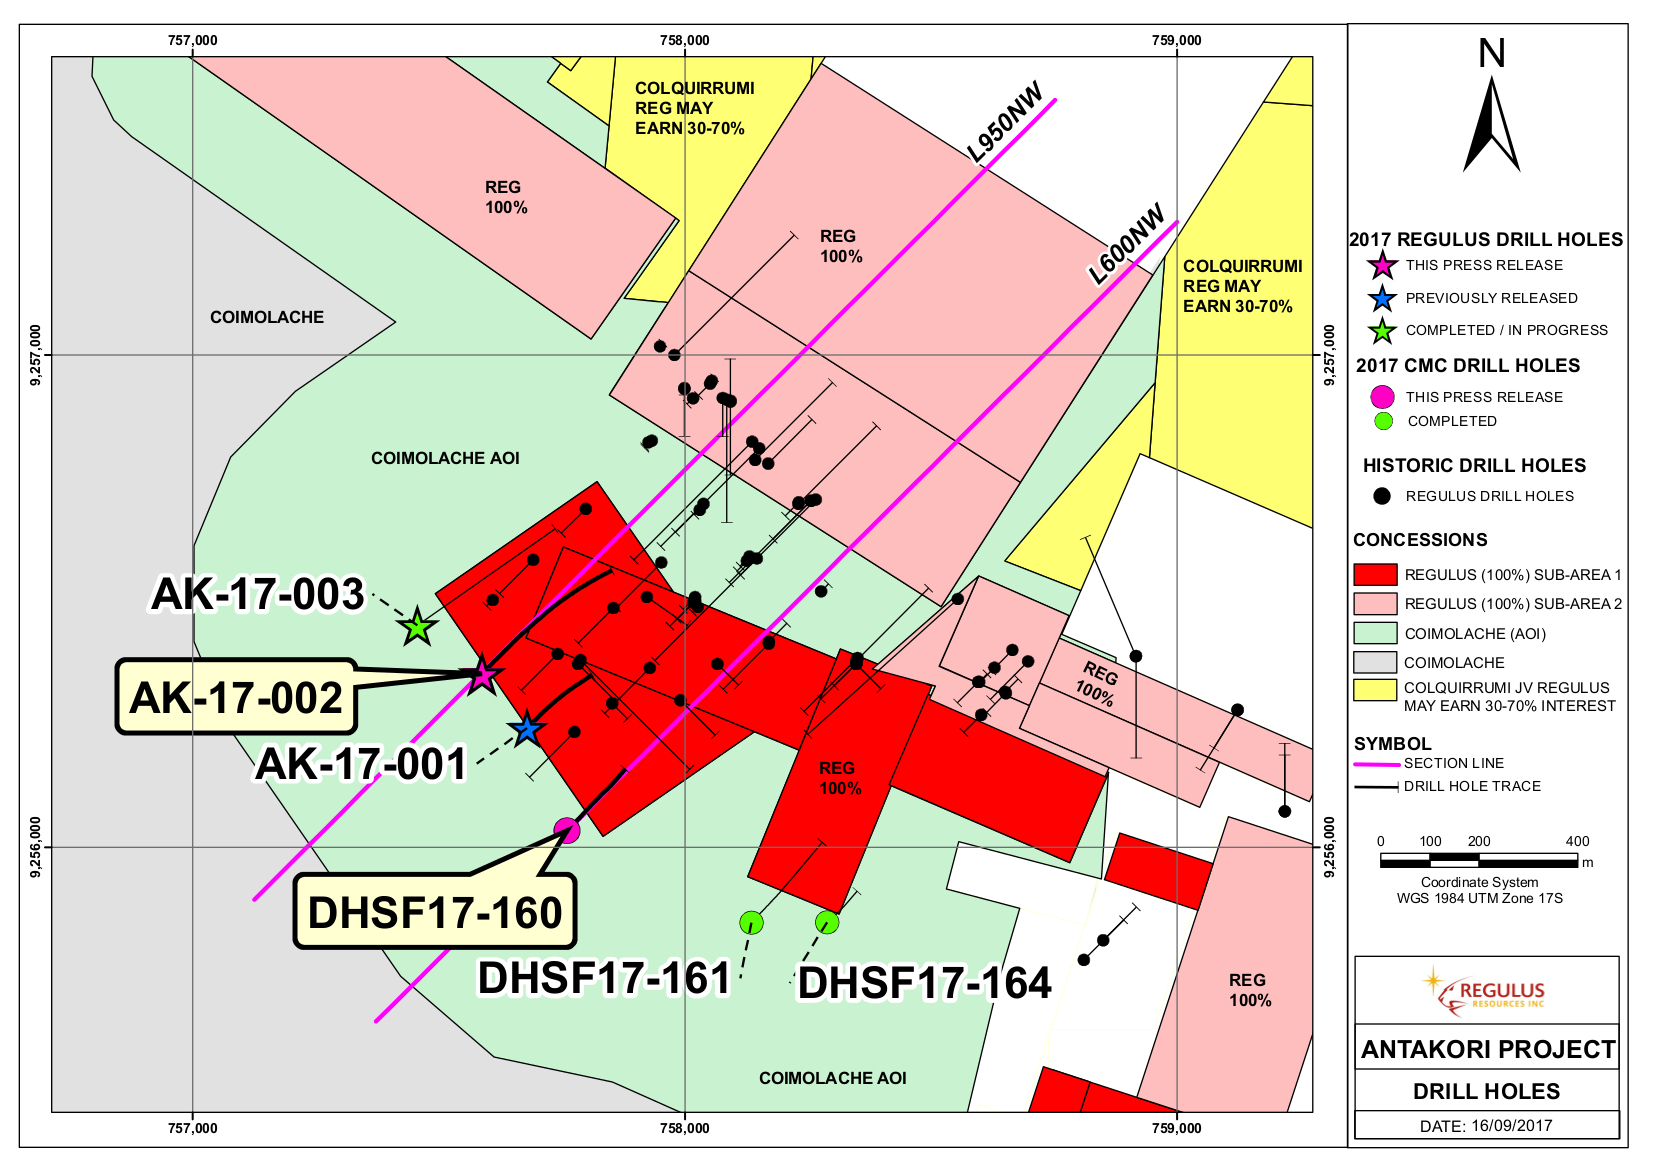 Figure 1.Drill hole locations - AntaKori Project.Location of the current drilling along southern margin of Regulus concessions and section lines L600NW and L950NW that are shown in Figures 2 and 3.